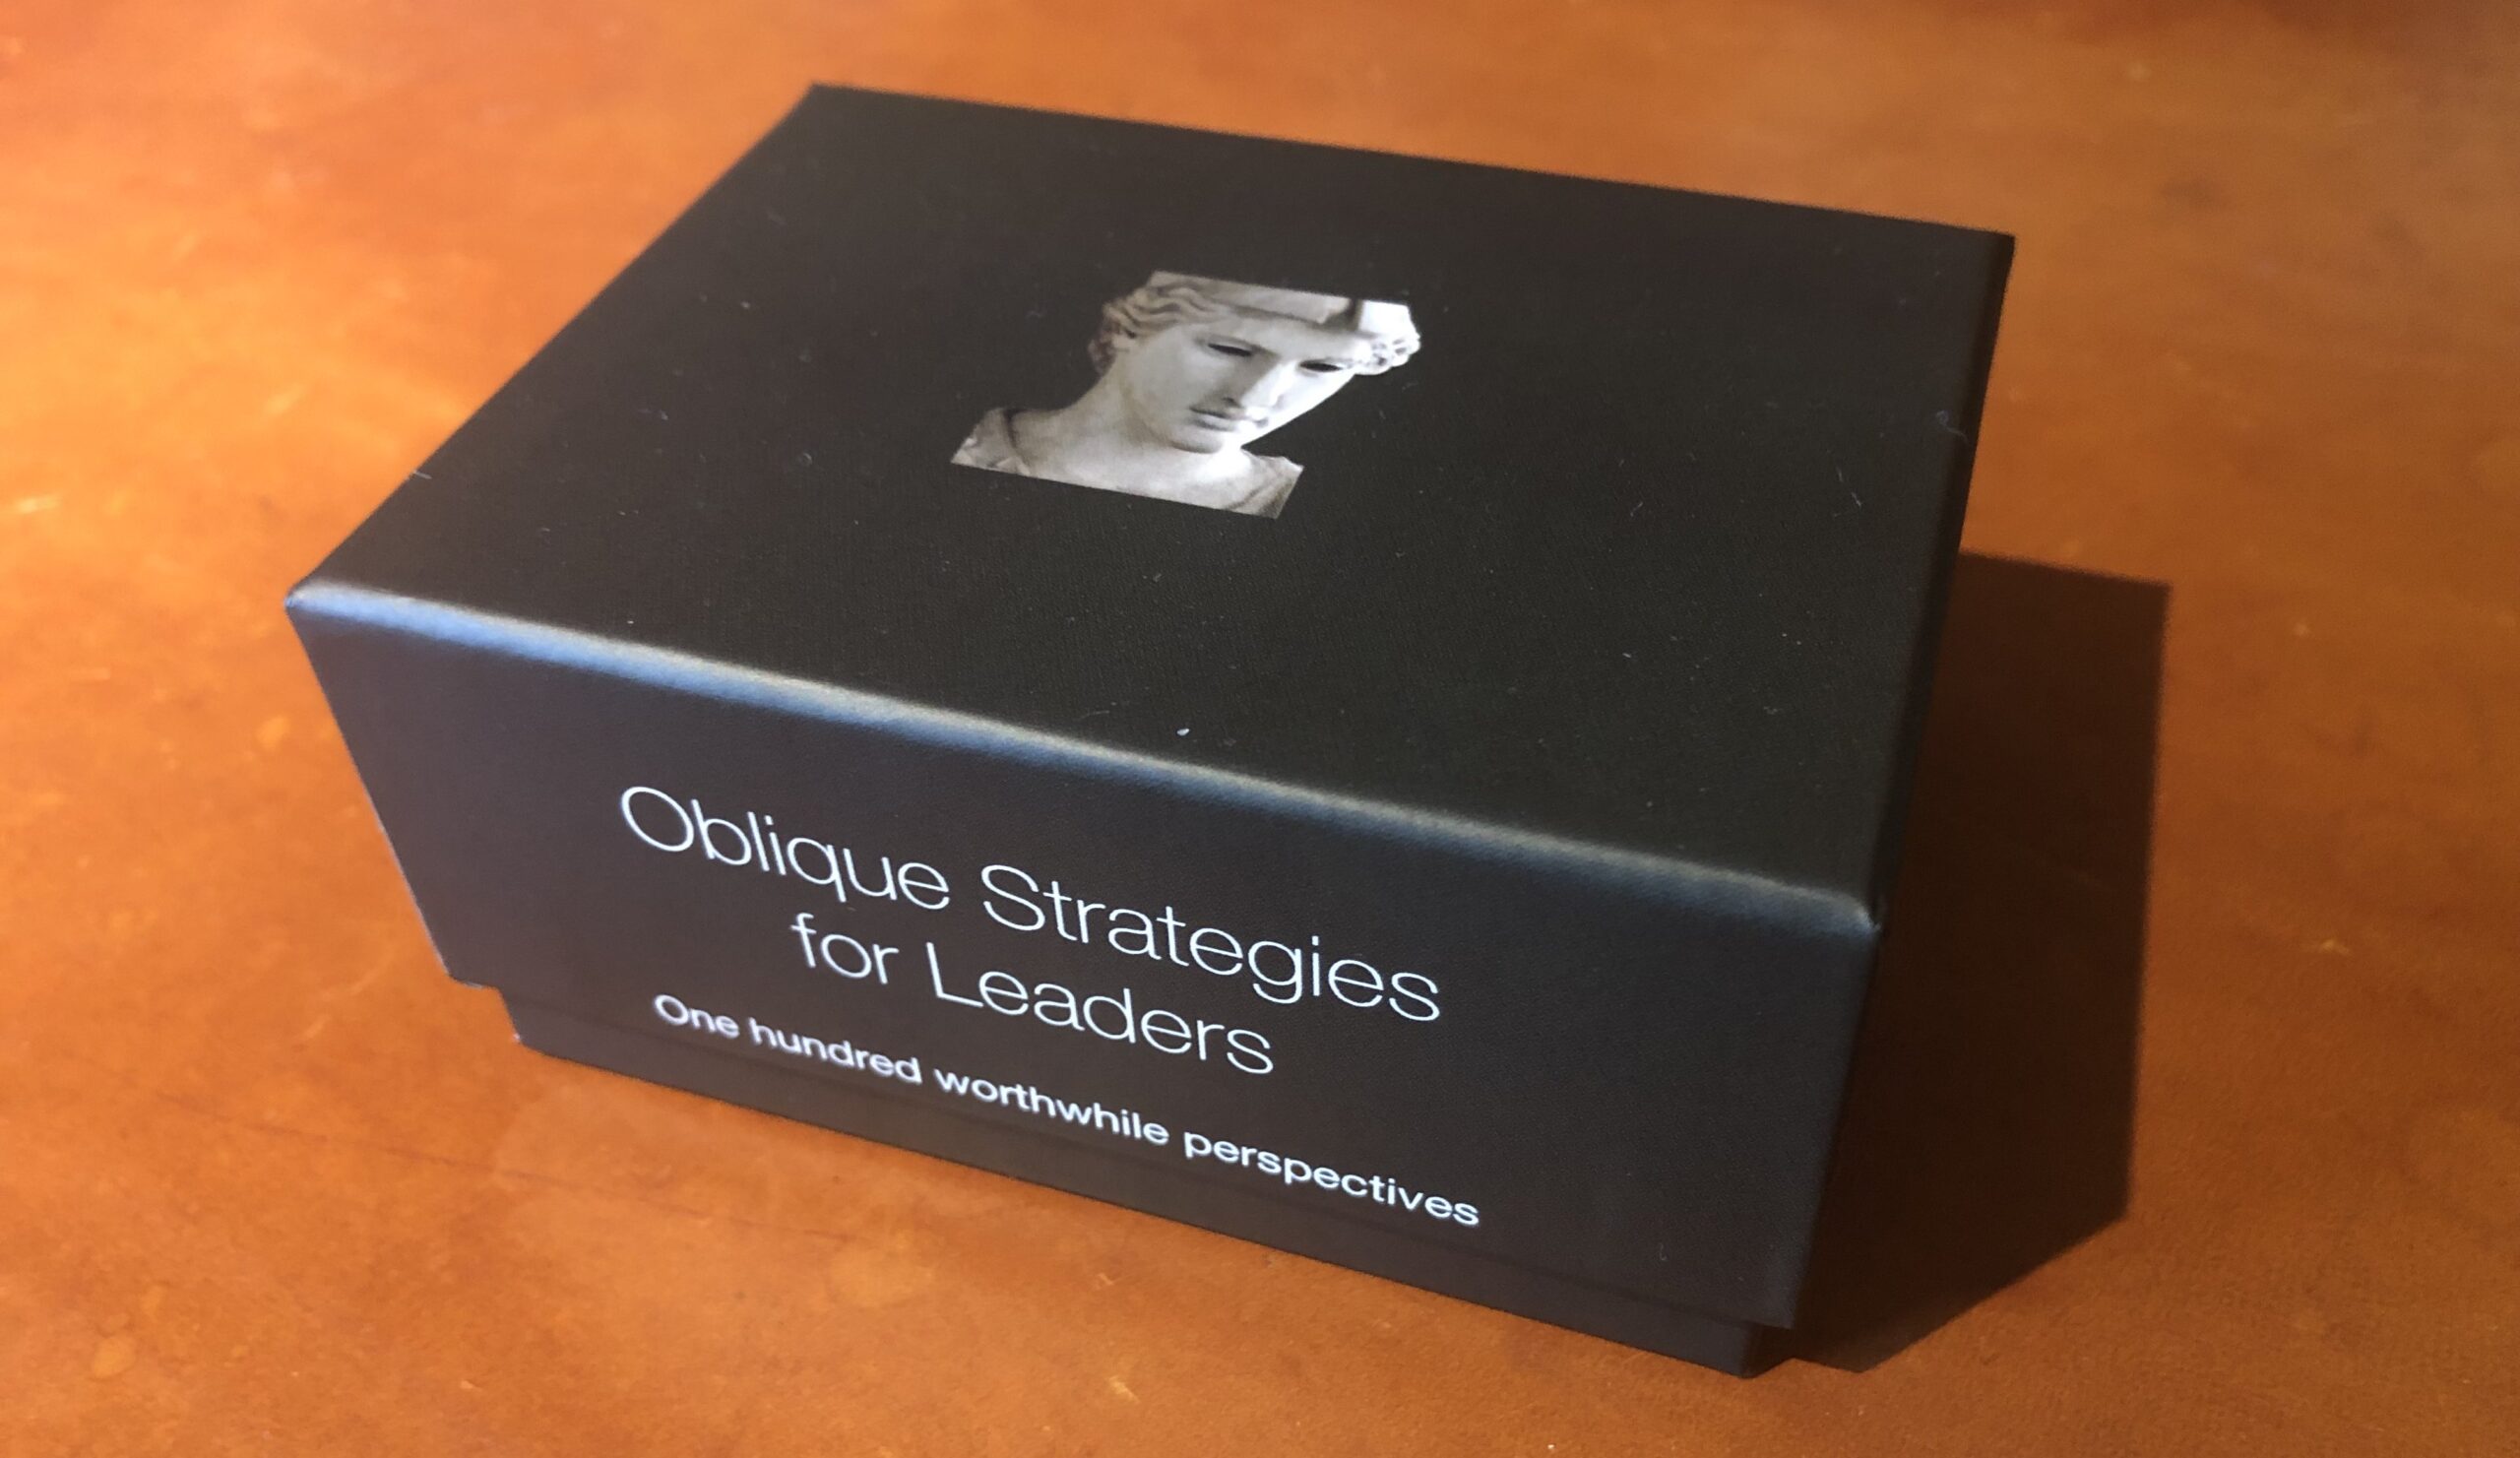 Oblique Strategies for Leaders